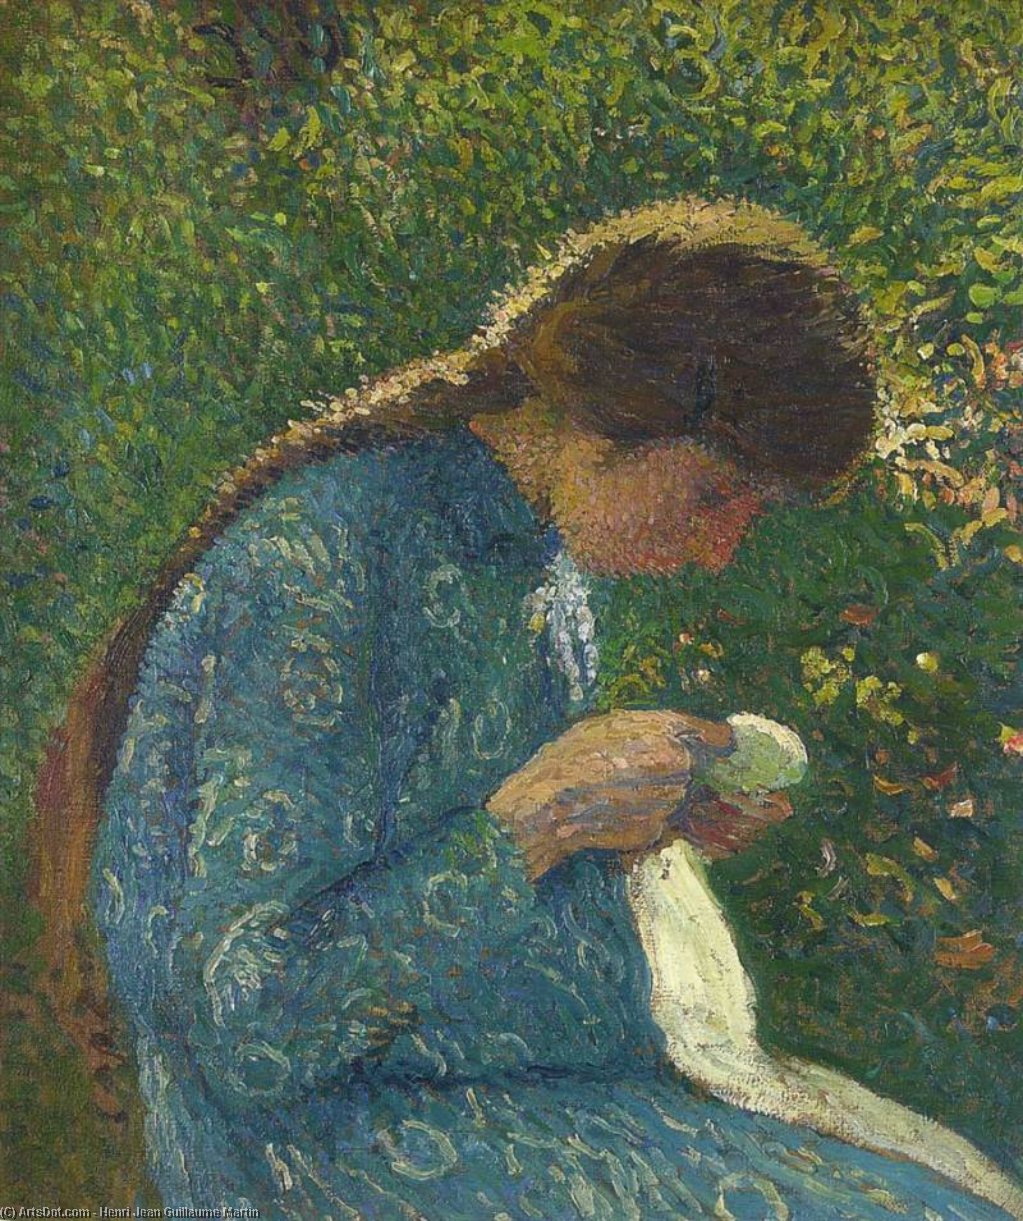 WikiOO.org - 백과 사전 - 회화, 삽화 Henri Jean Guillaume Martin - a young woman sewing